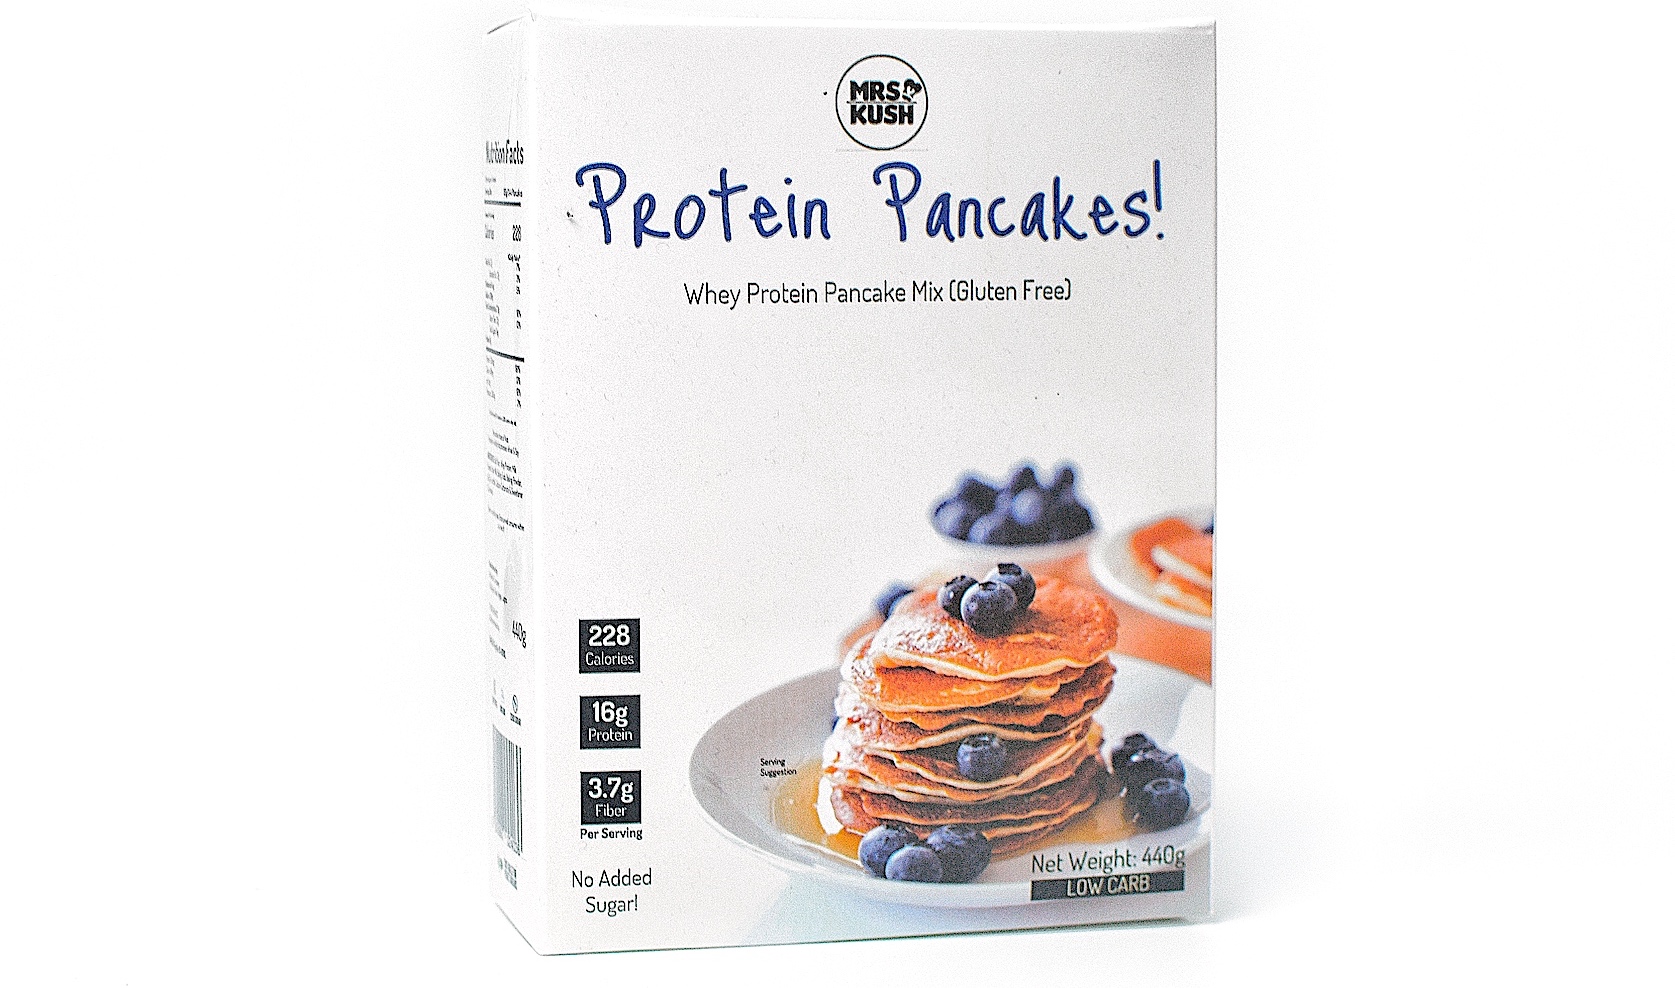 Is The Healthy Baker Protein Pancake Mix 400g Halal, Haram or Mushbooh?